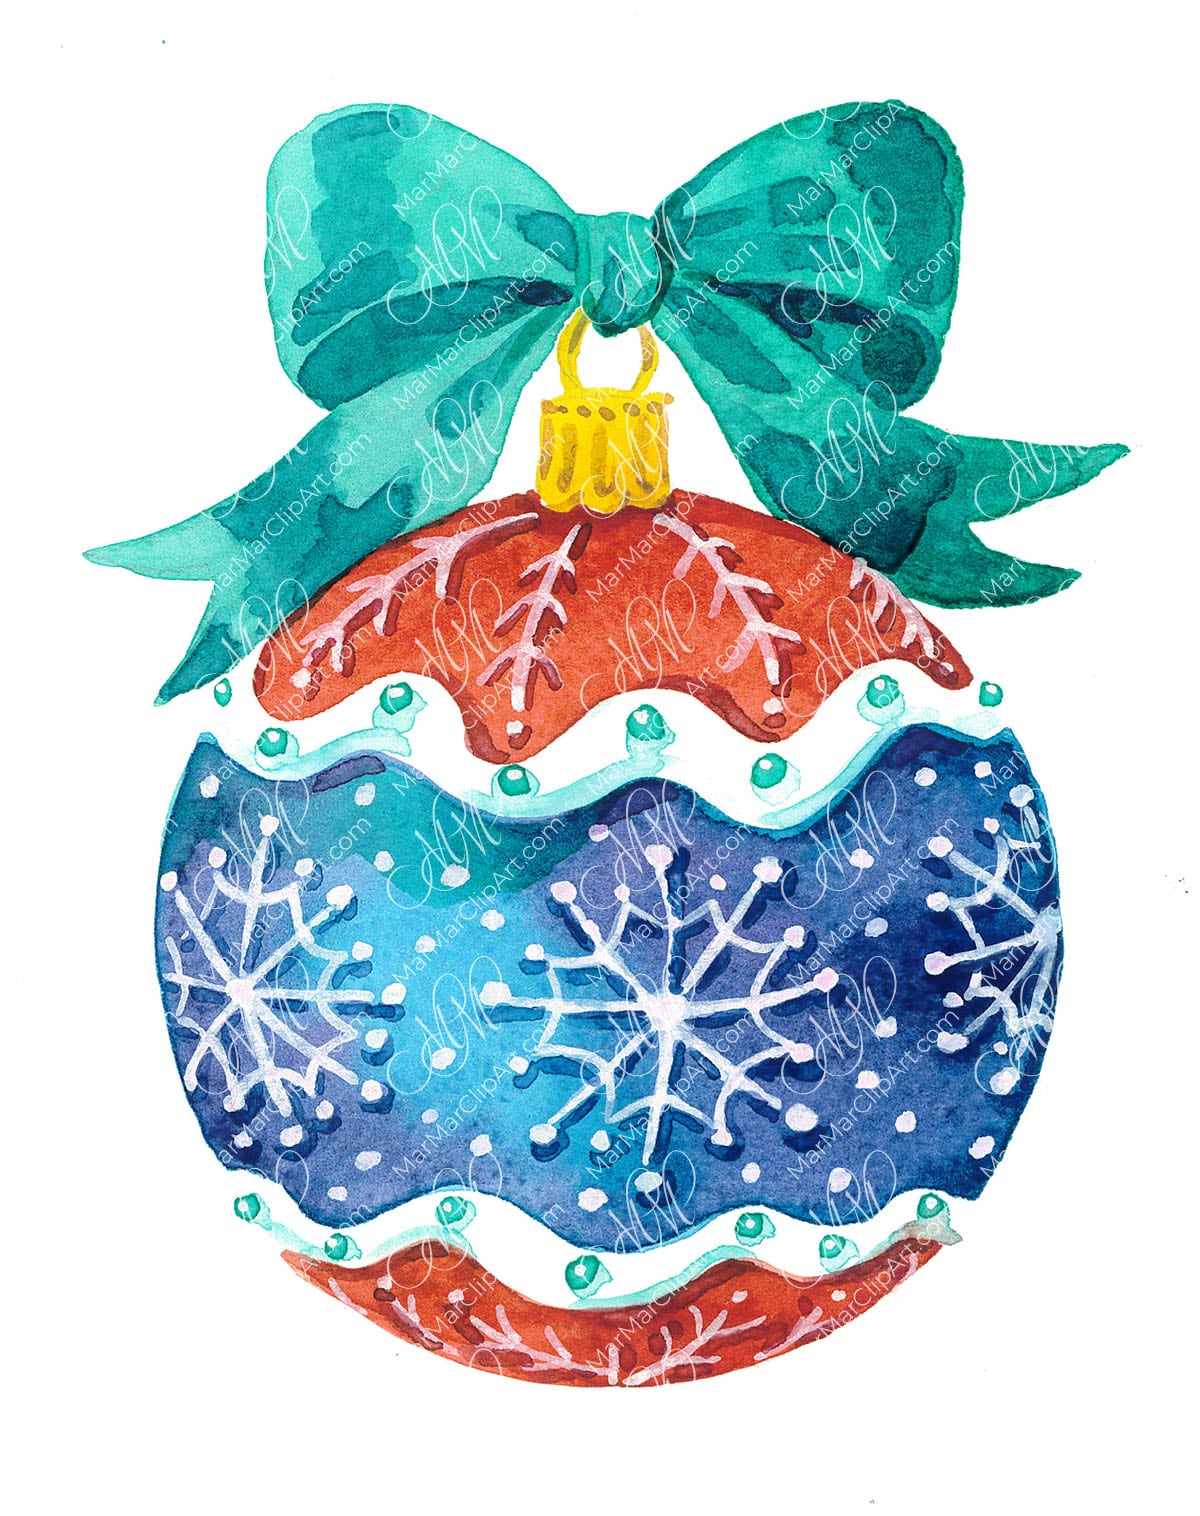 Christmas ball with snowflakes. Watercolor hand made illustration